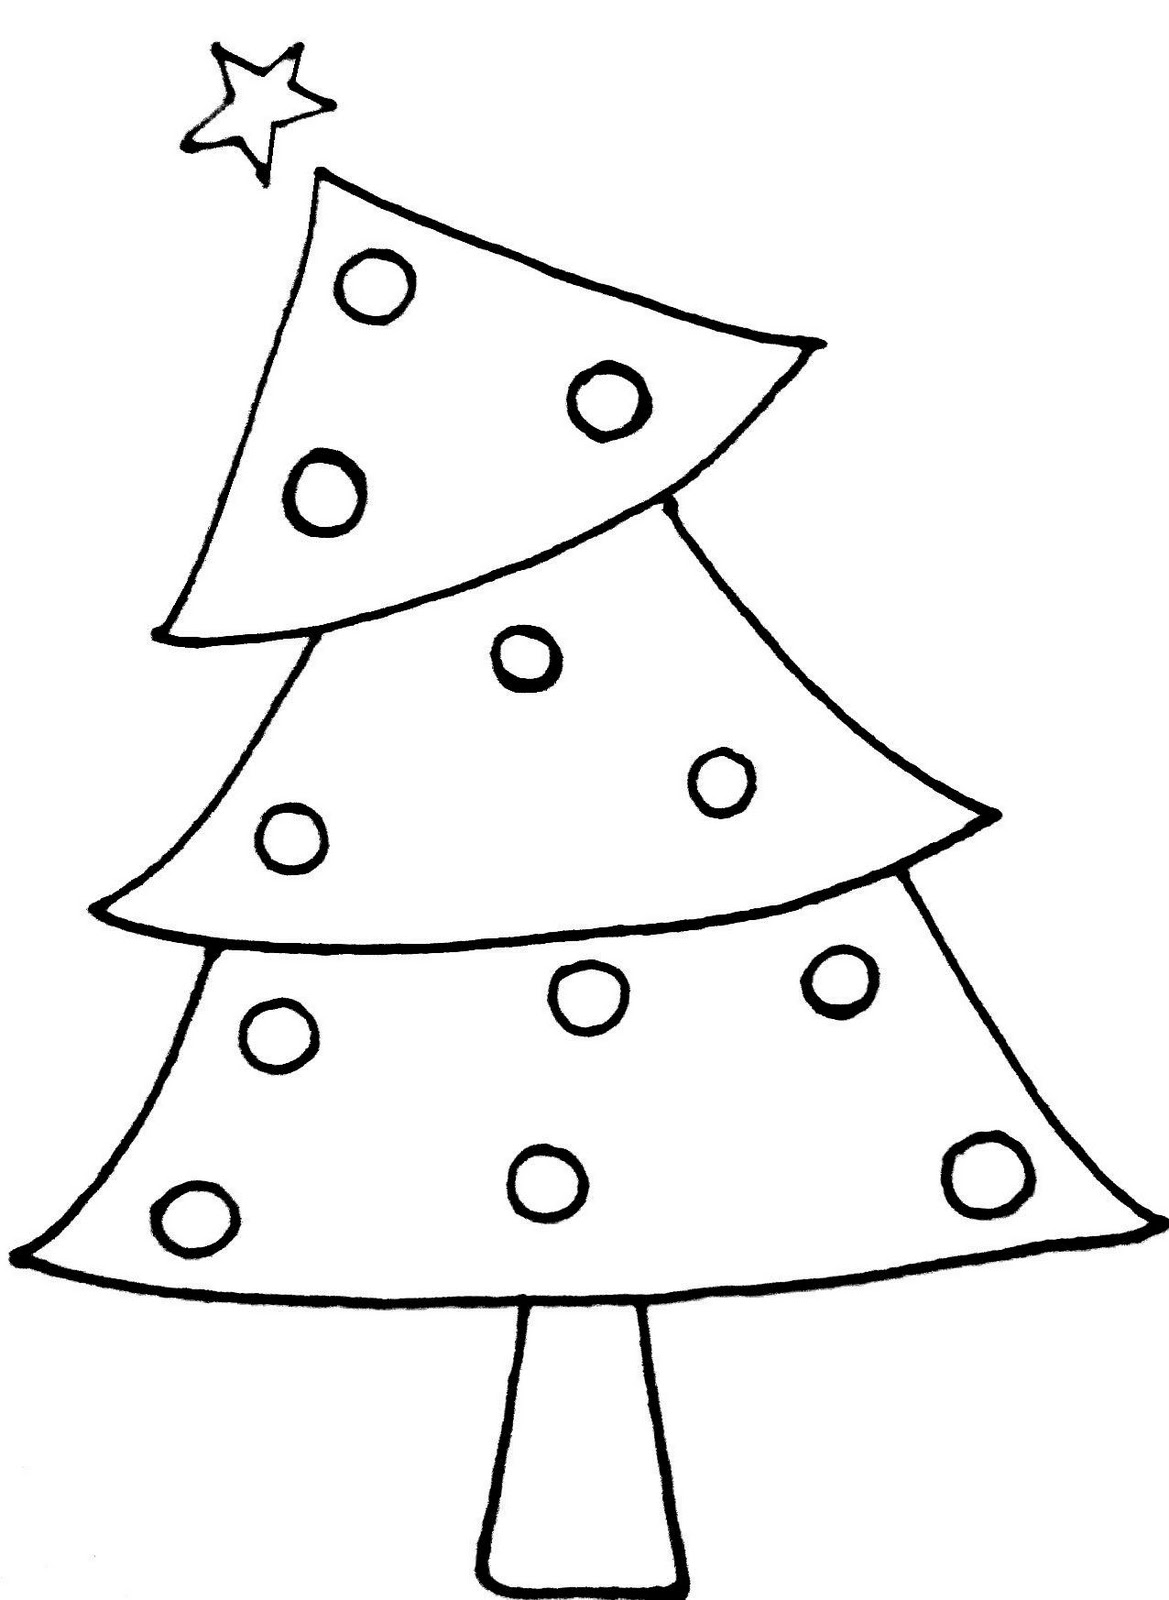 Black And White Clipart Christmas Trees : Vintage Children Graphic ...